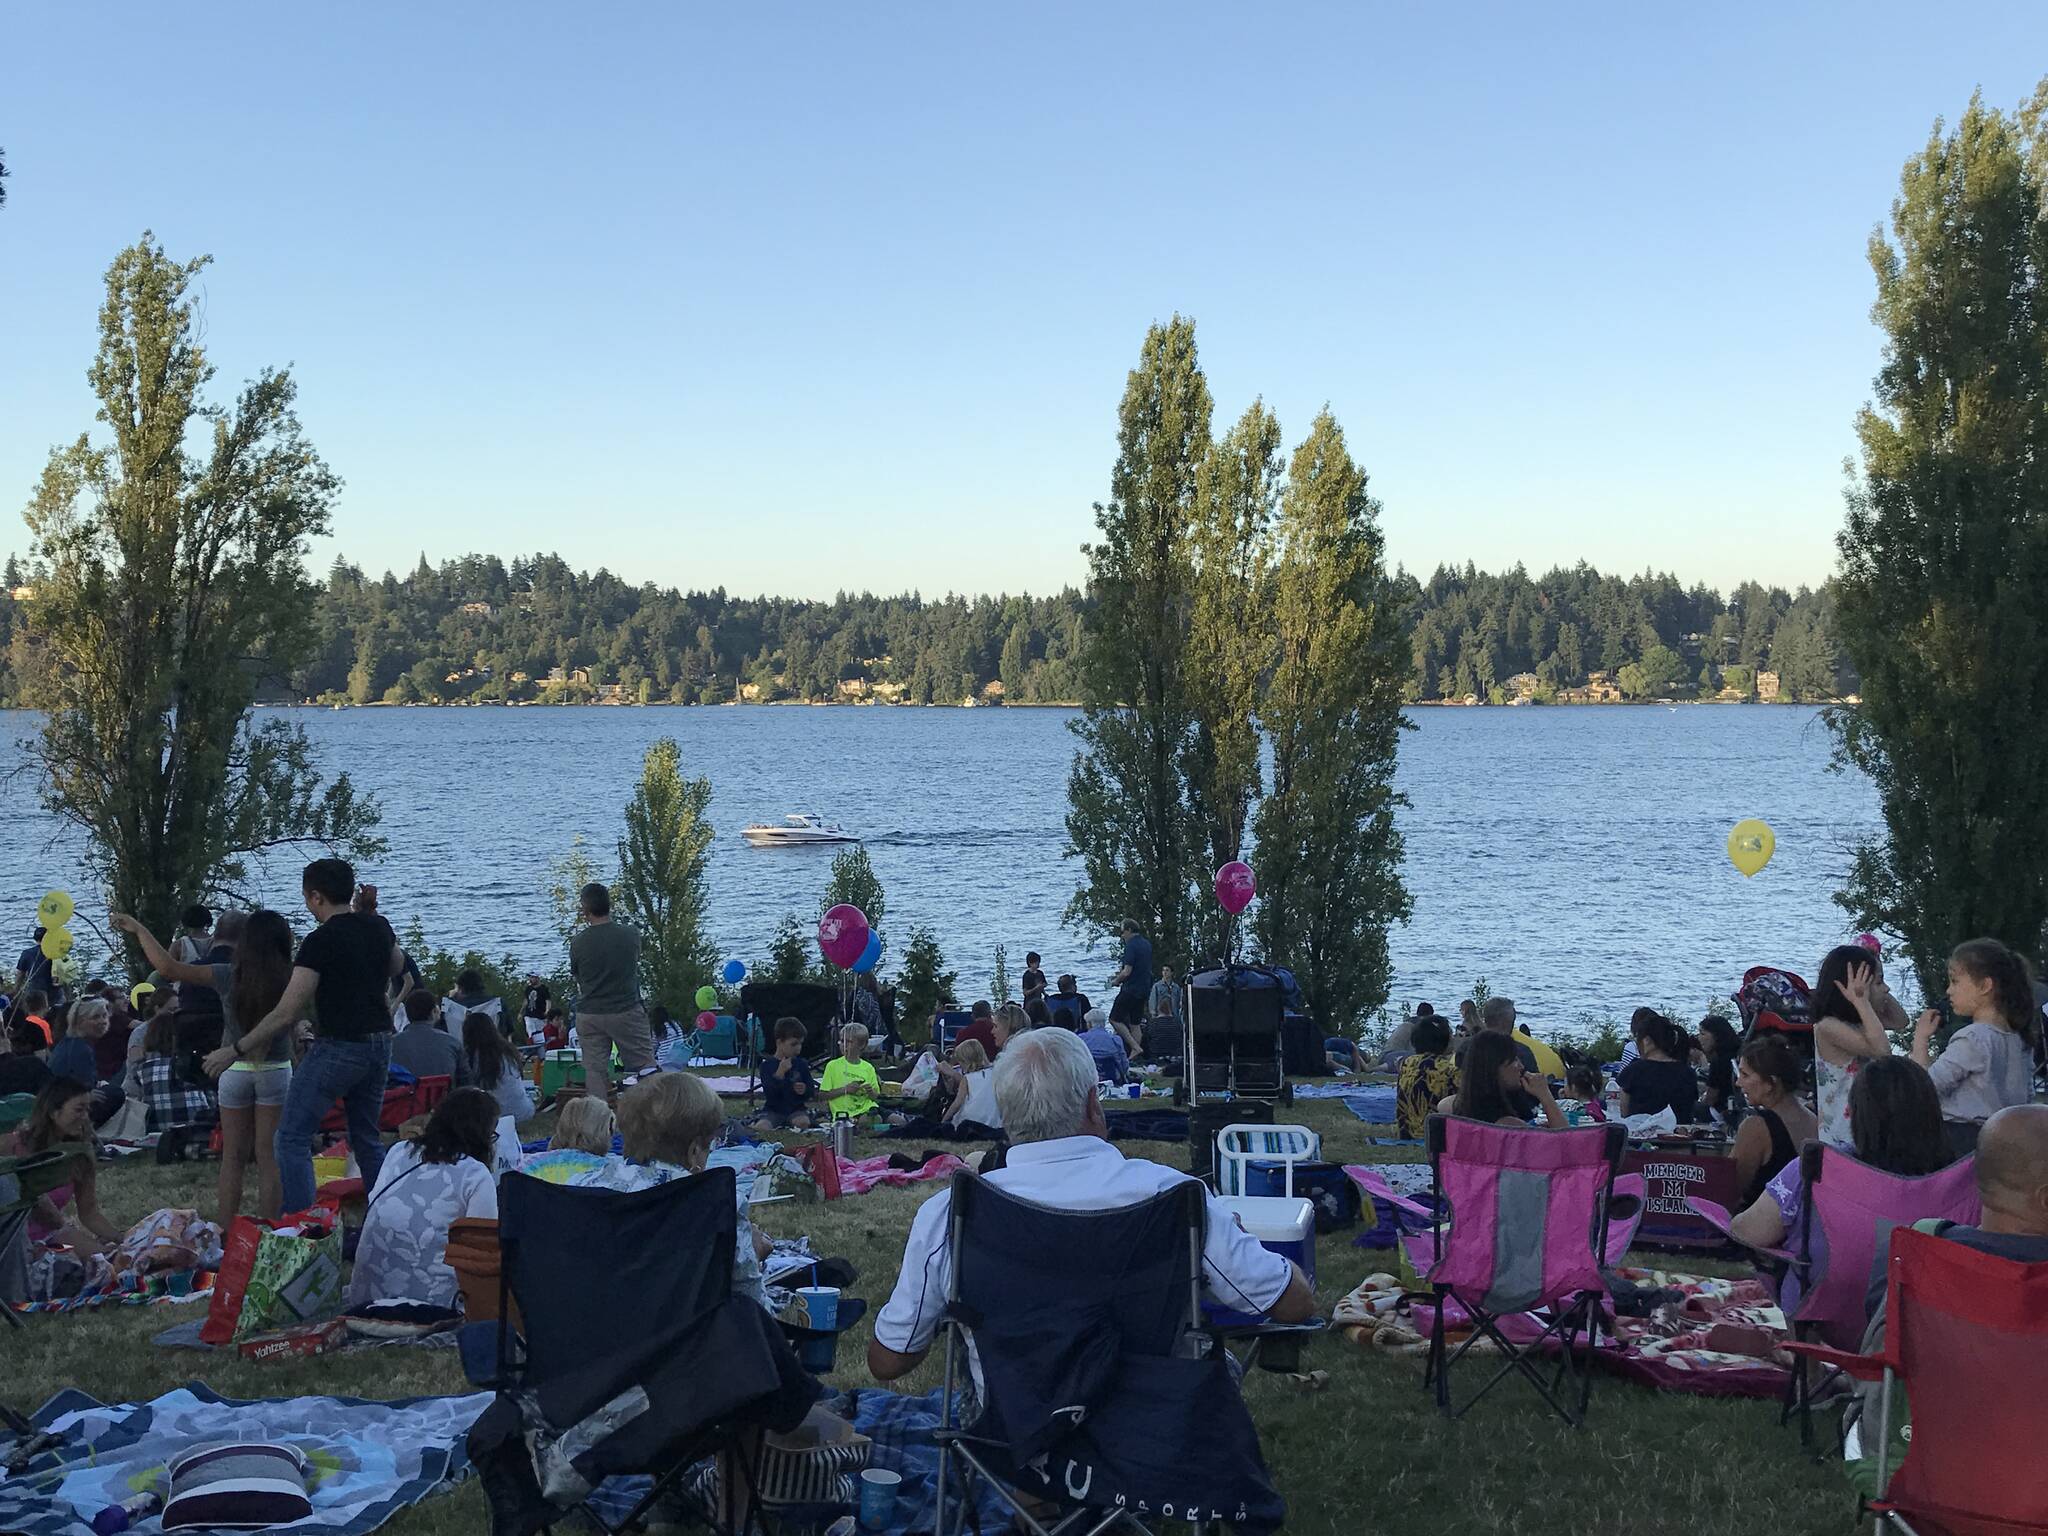 Community members will once again gather at Luther Burbank Park for Summer Celebration. Courtesy of the city of Mercer Island